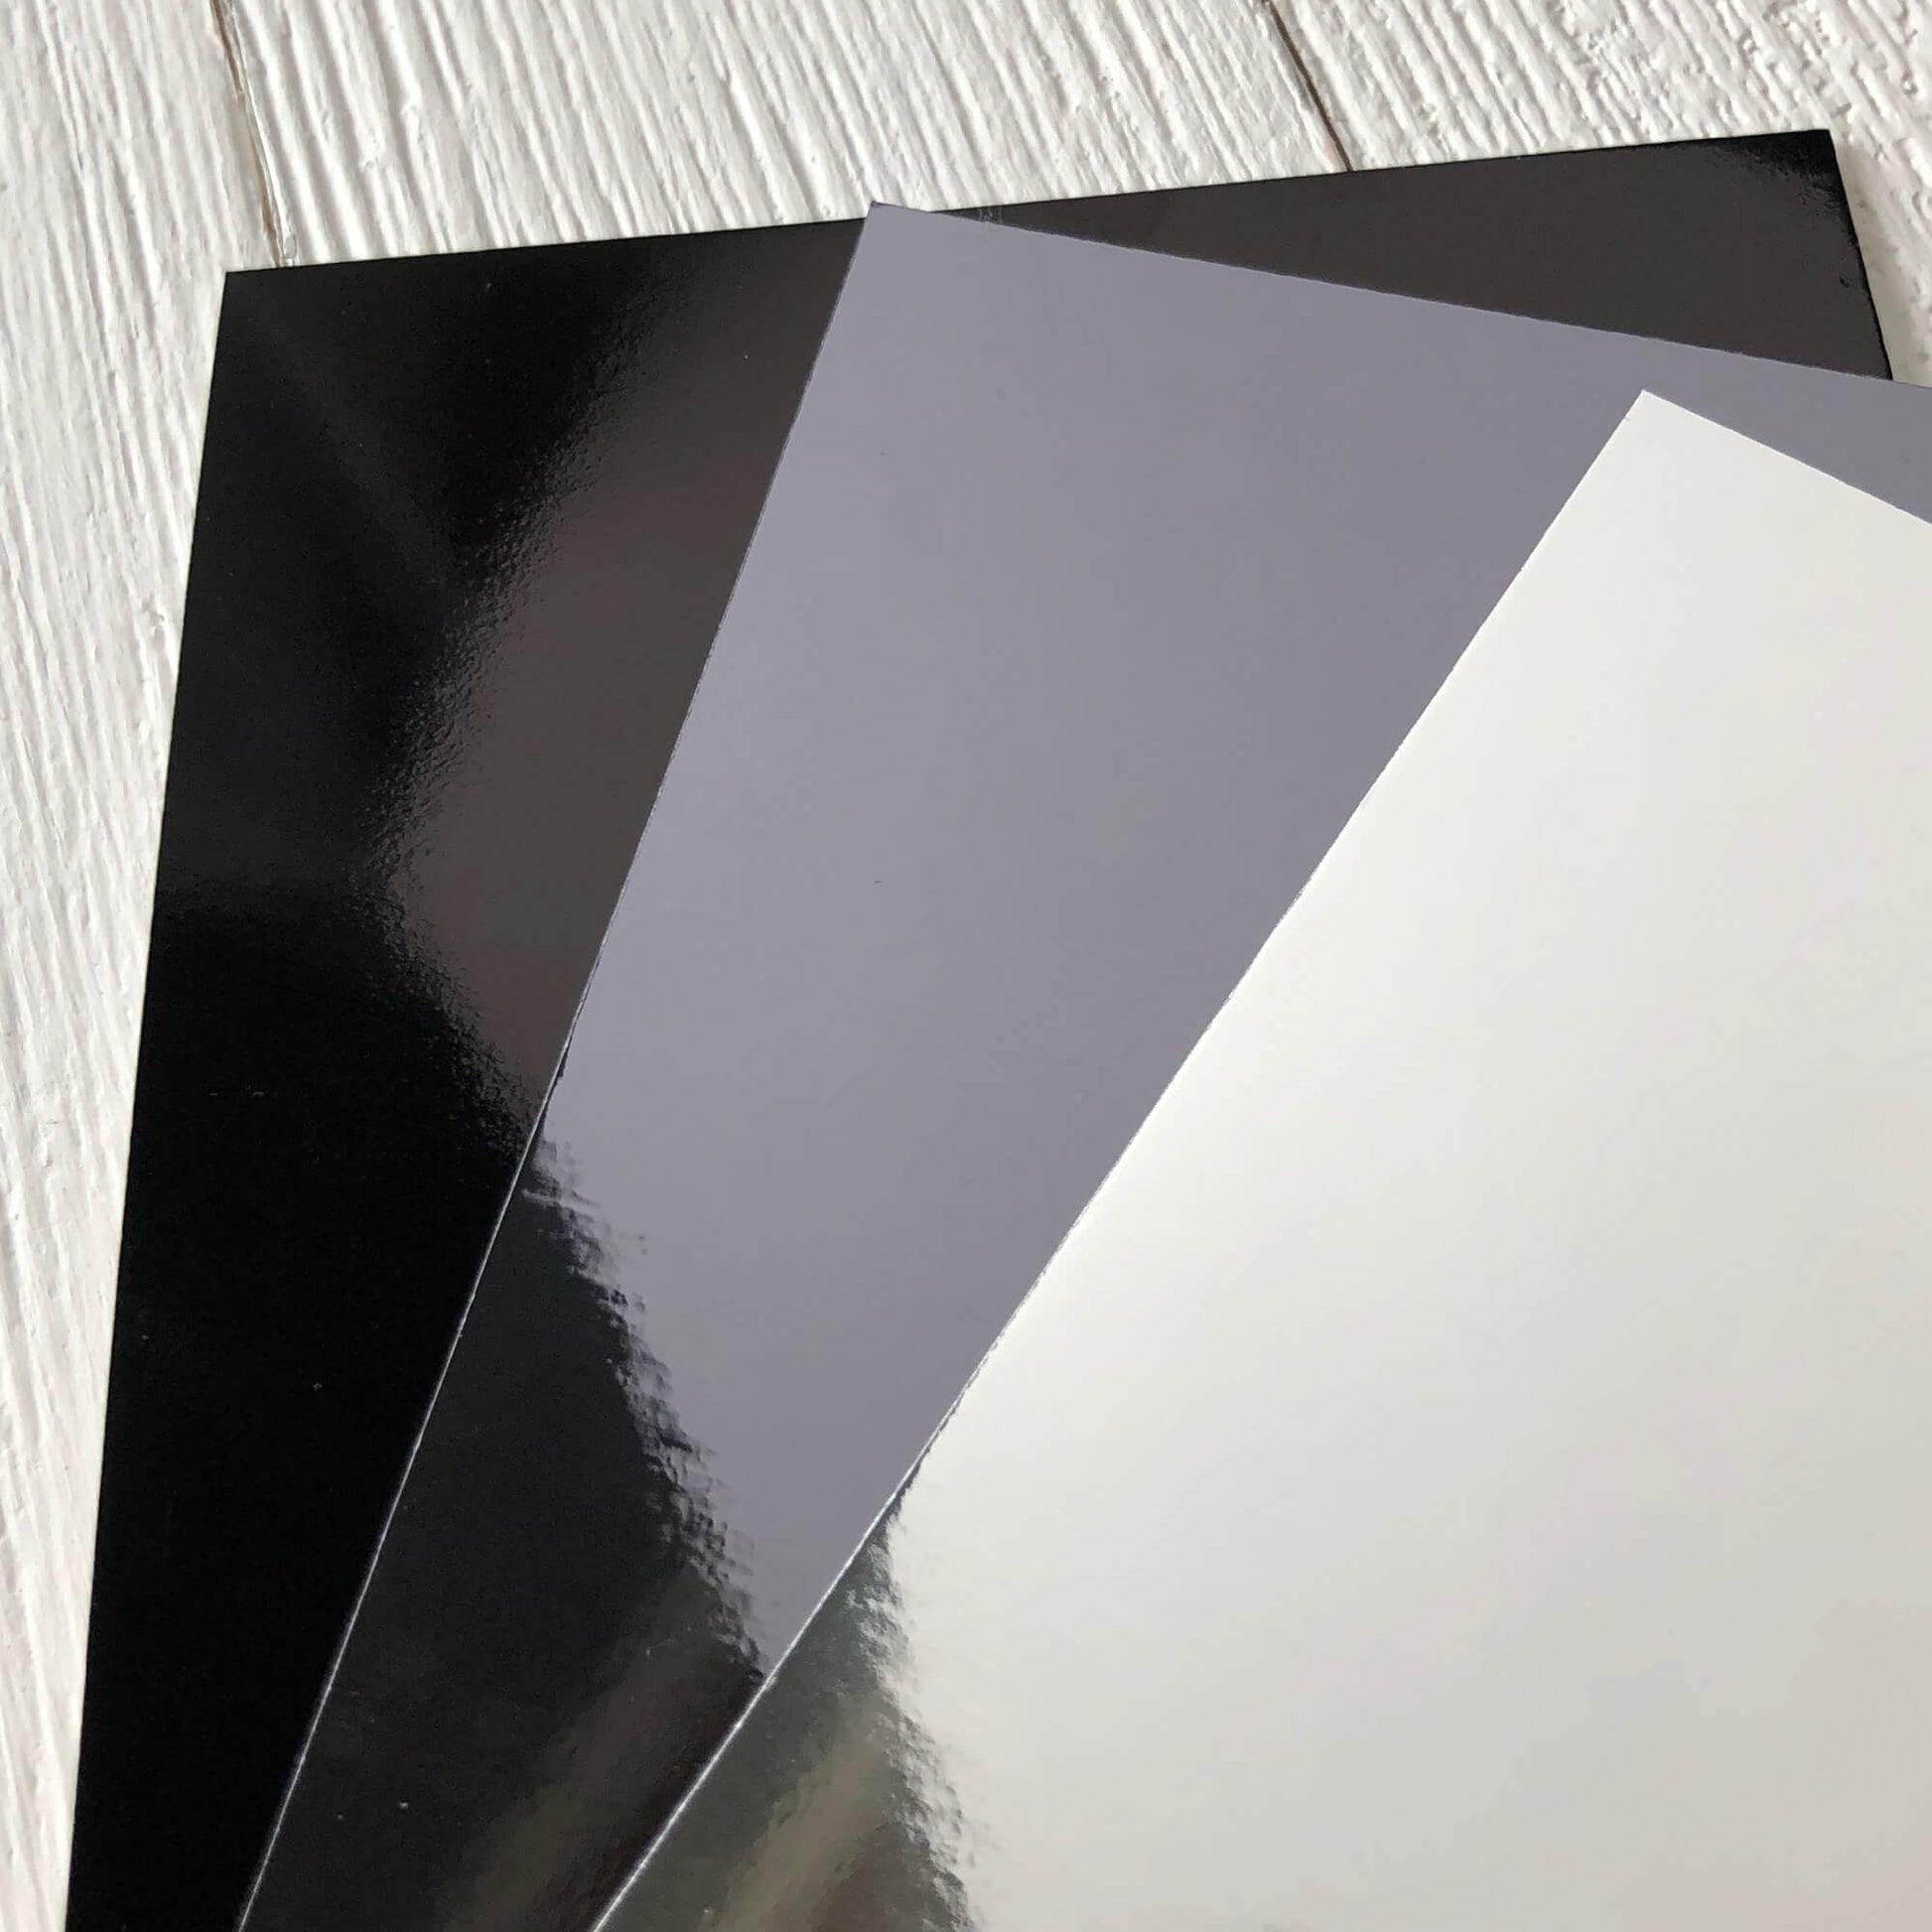 Mirror Silver Metallic MirriCard Cardstock - 8.5 x 11 inch - 100 lb / 12pt - 10 Sheets from Cardstock Warehouse